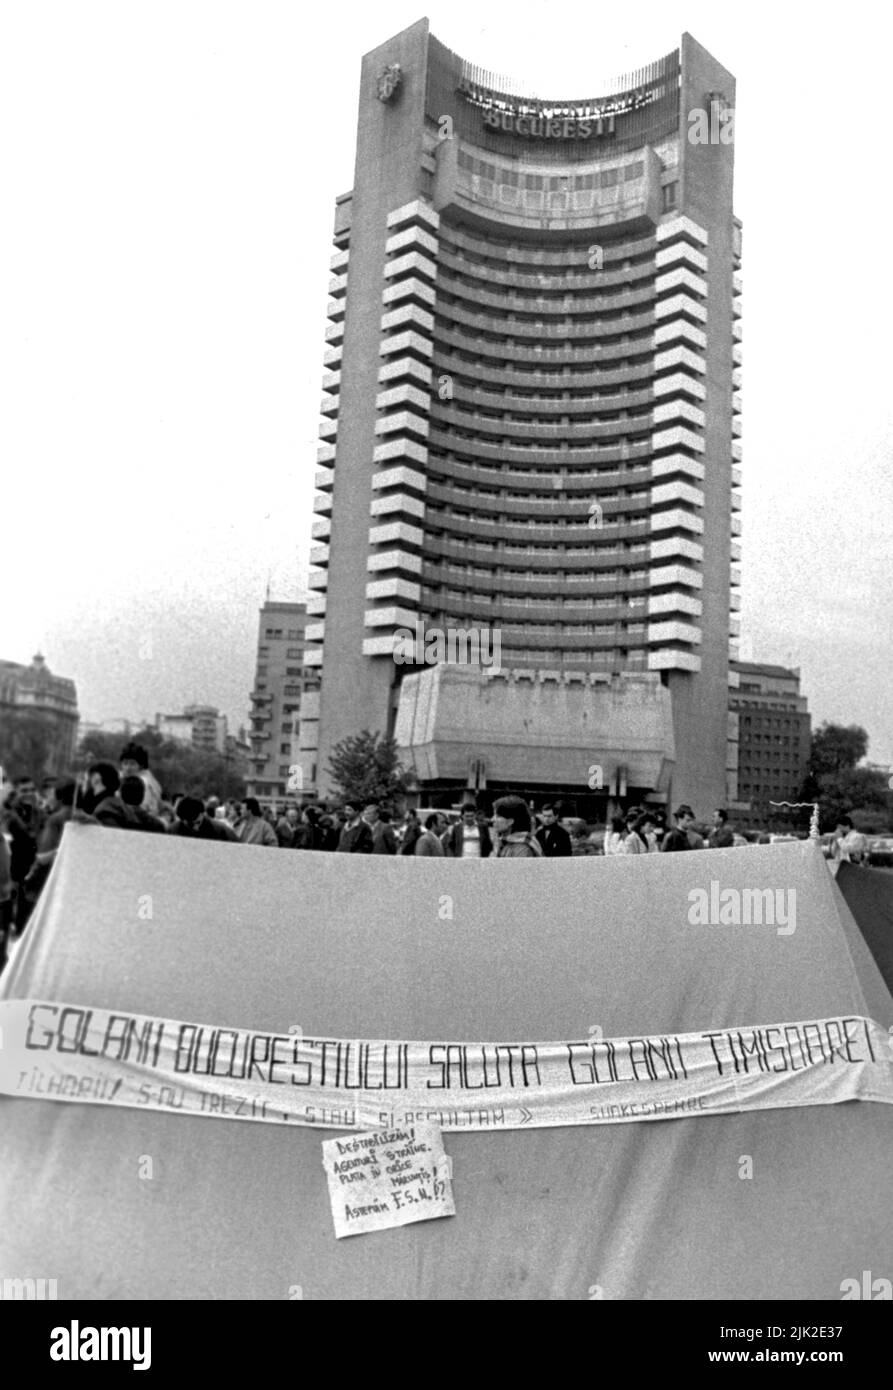 Bucharest, Romania, May 1990. 'Golaniada', a major anti-communism protest  in the University Square following the Romanian Revolution of 1989. People would gather daily to protest the ex-communists that took the power after the Revolution. The main demand was that no former party member would be allowed to run in the elections of May 20th. President Iliescu called the protesters 'golani' (hooligans). In this picture, a banner says 'The hooligans in Bucharest greet the hooligans in Timisoara'. Stock Photo